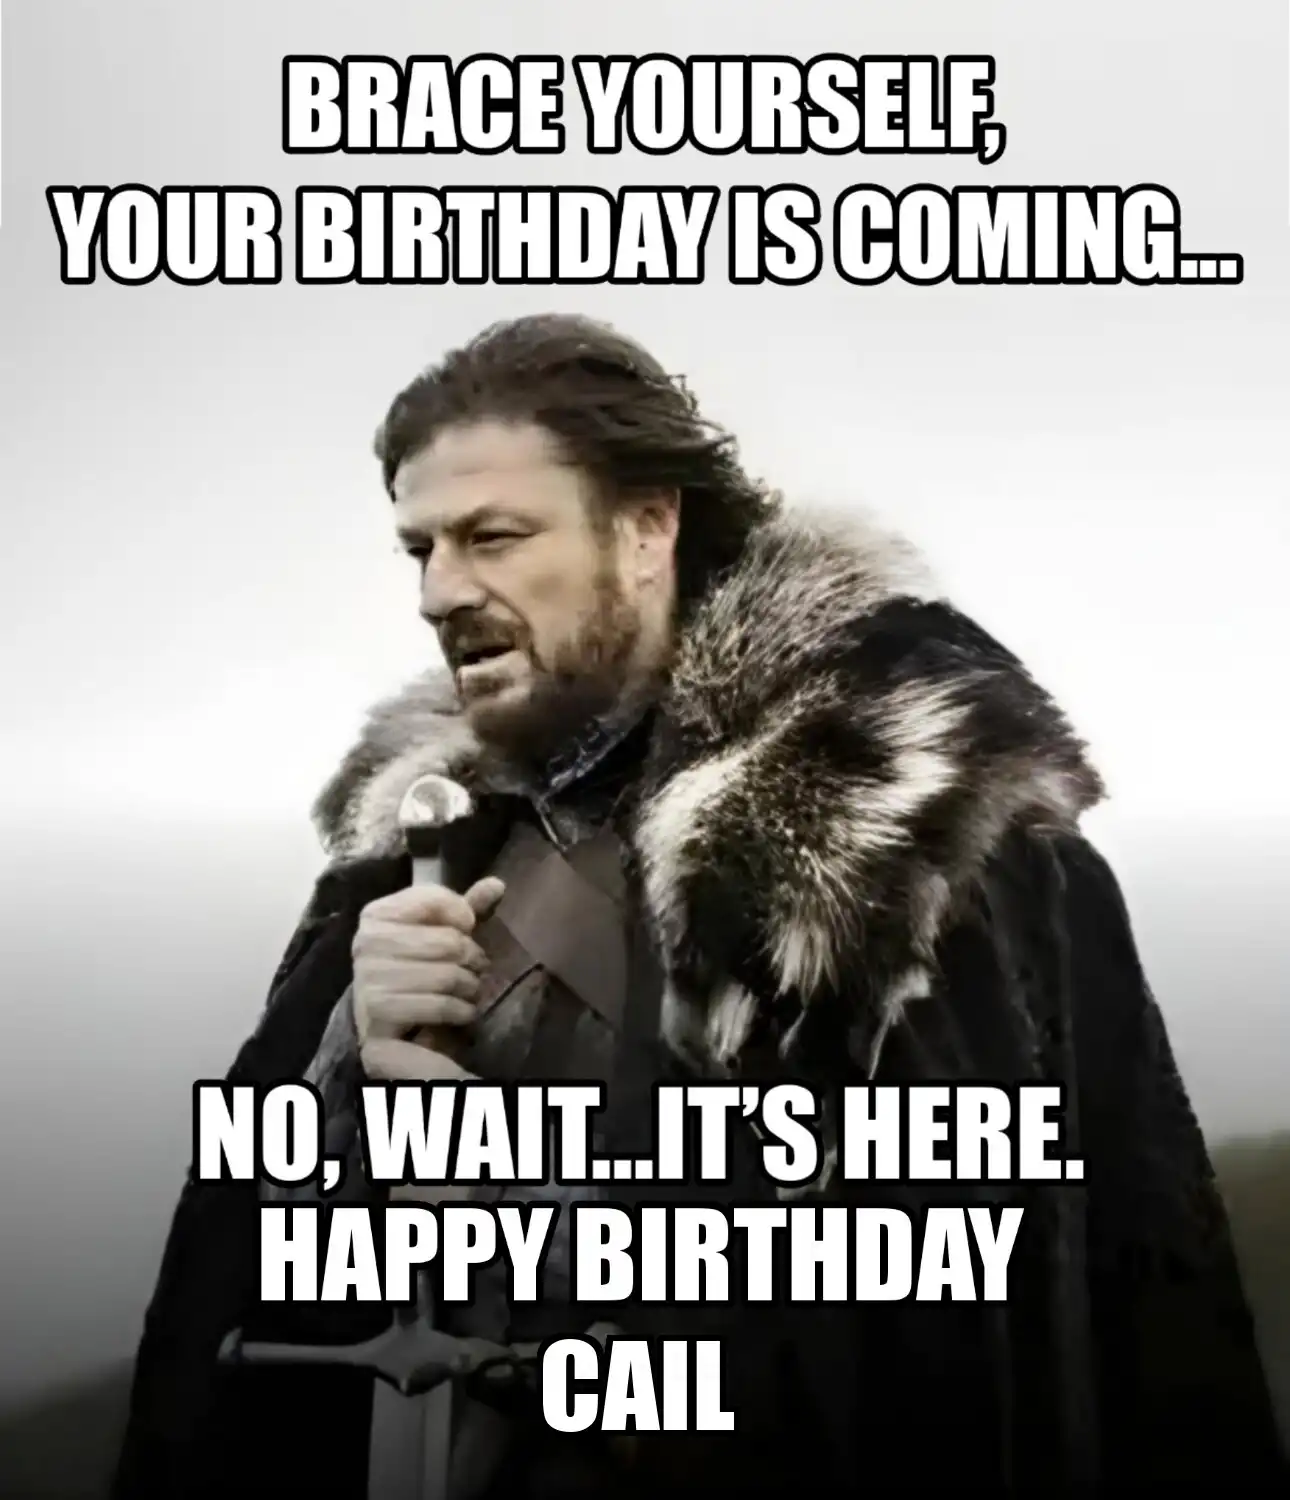 Happy Birthday Cail Brace Yourself Your Birthday Is Coming Meme